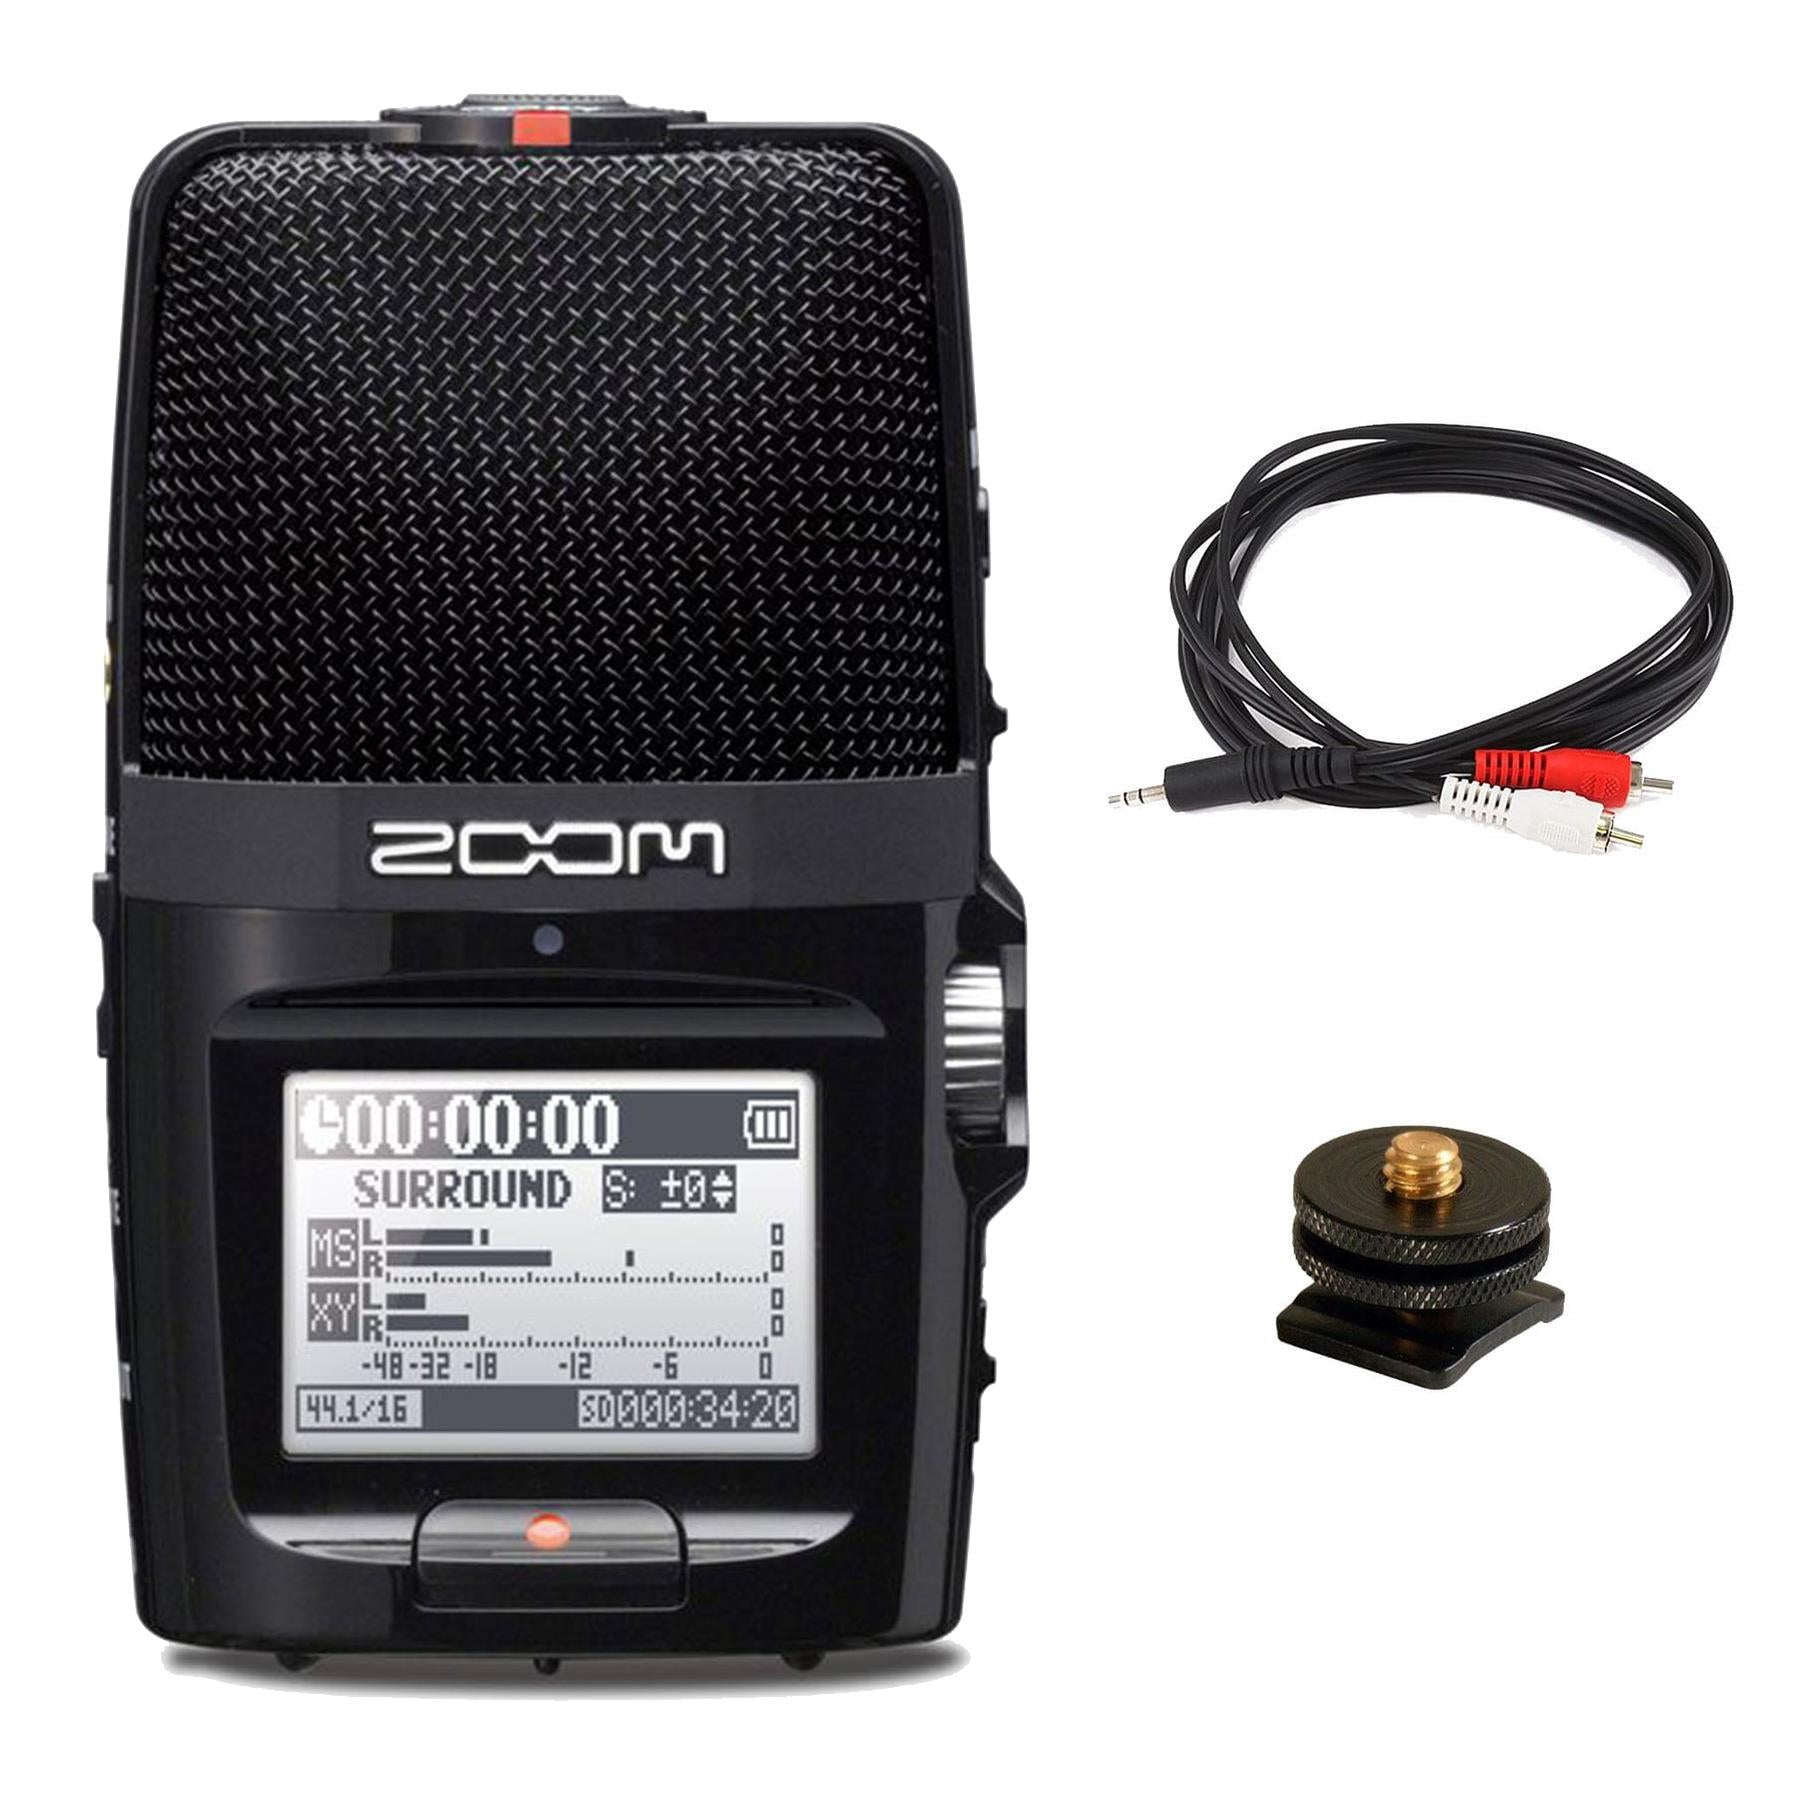  Zoom H2n Stereo/Surround-Sound Portable Recorder, 5